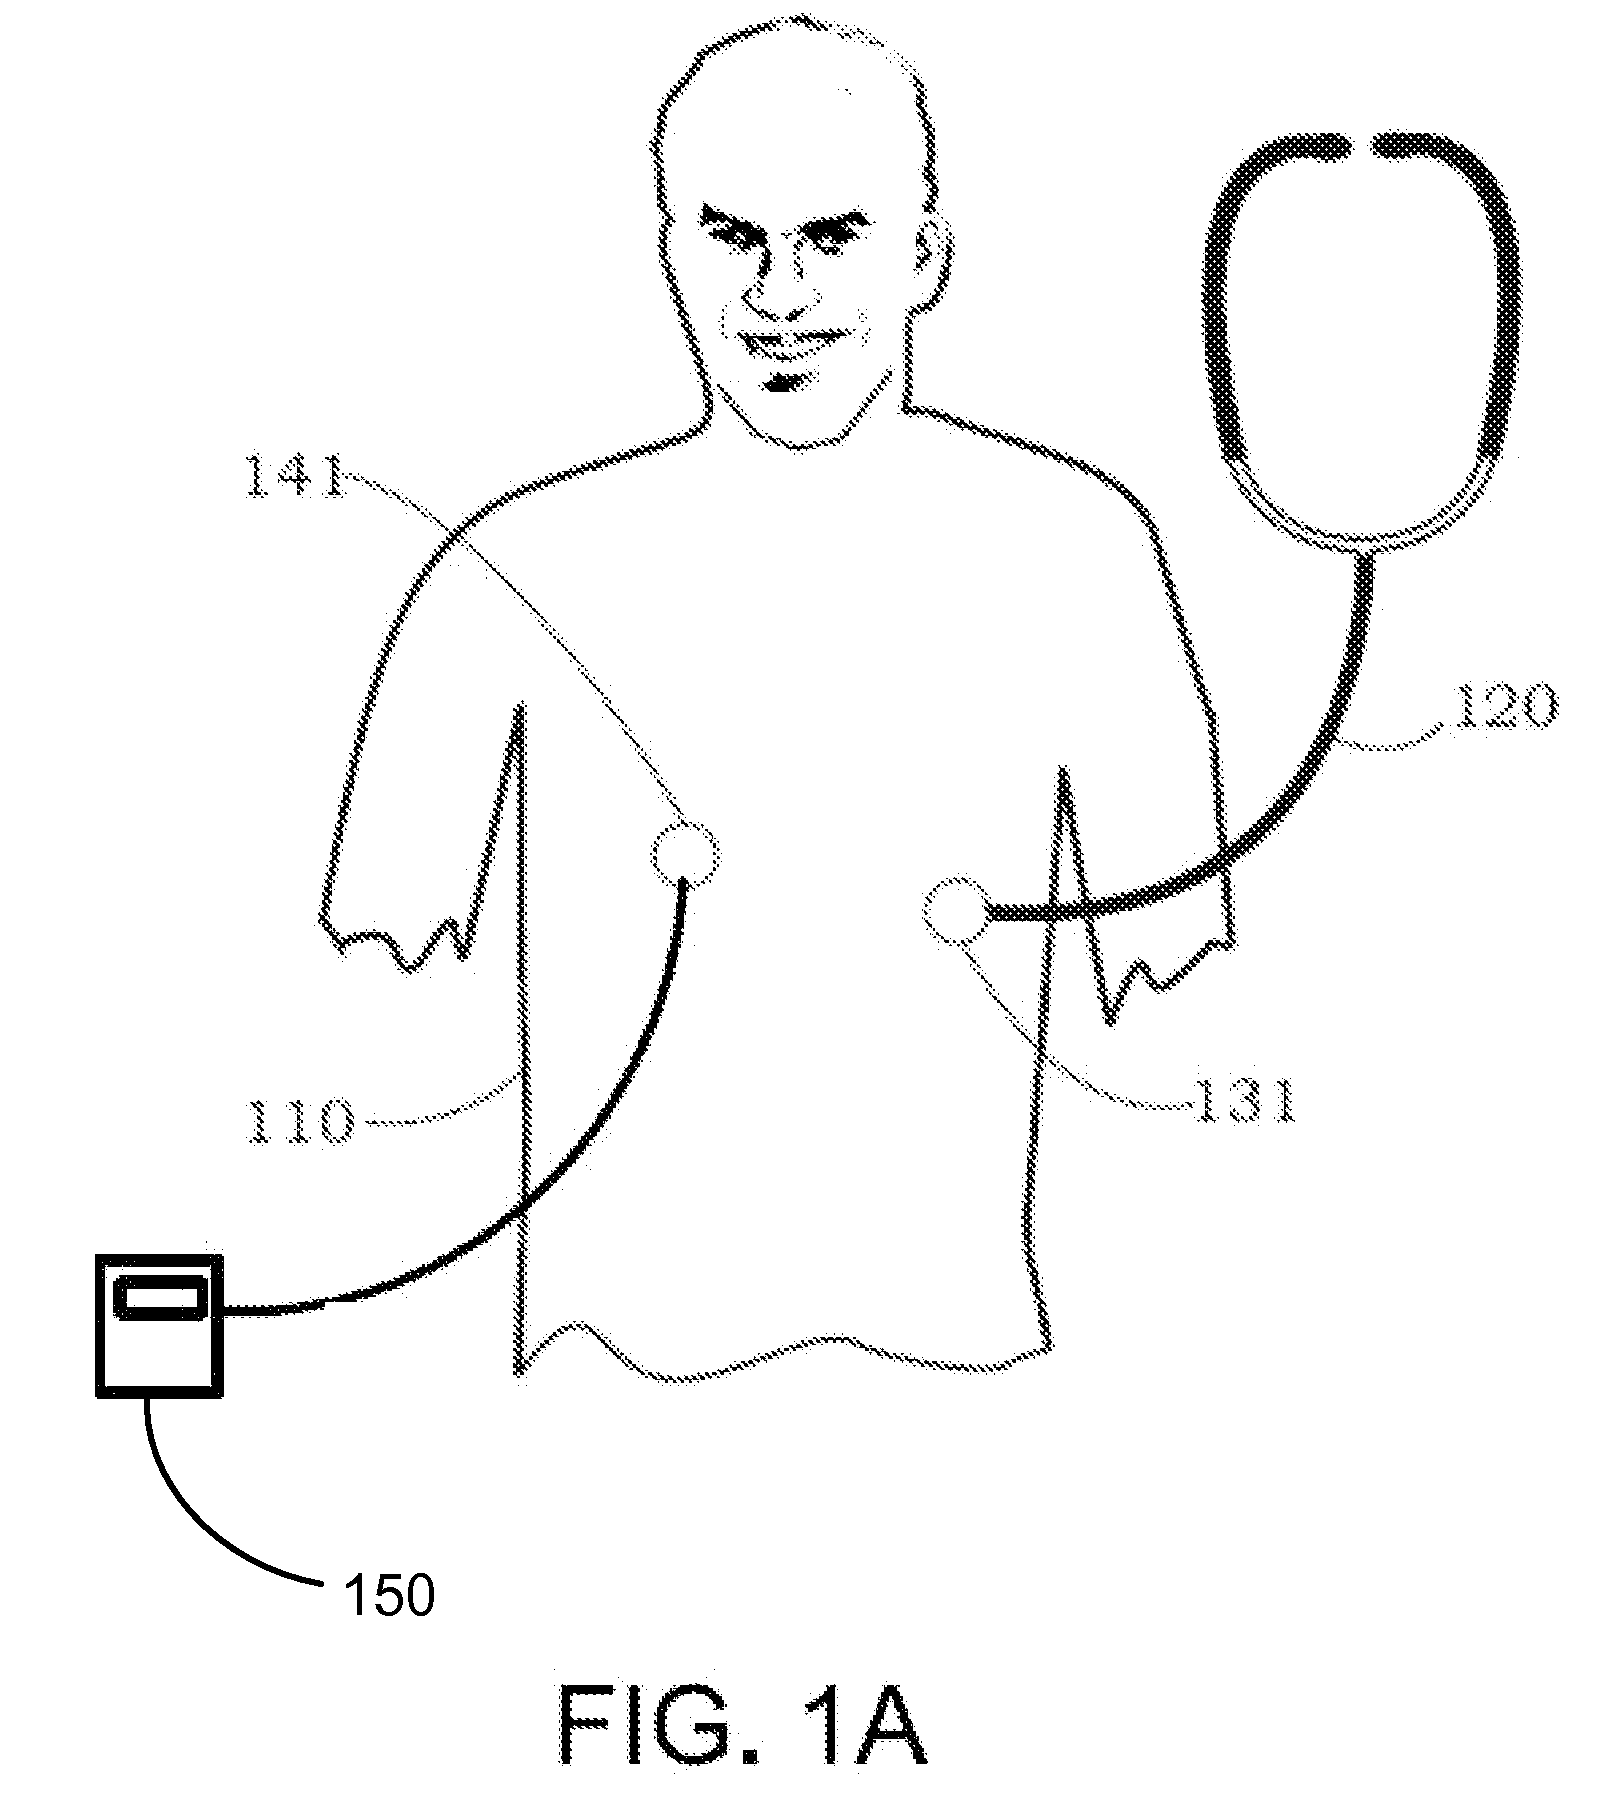 Systems and methods for calibration of heart sounds